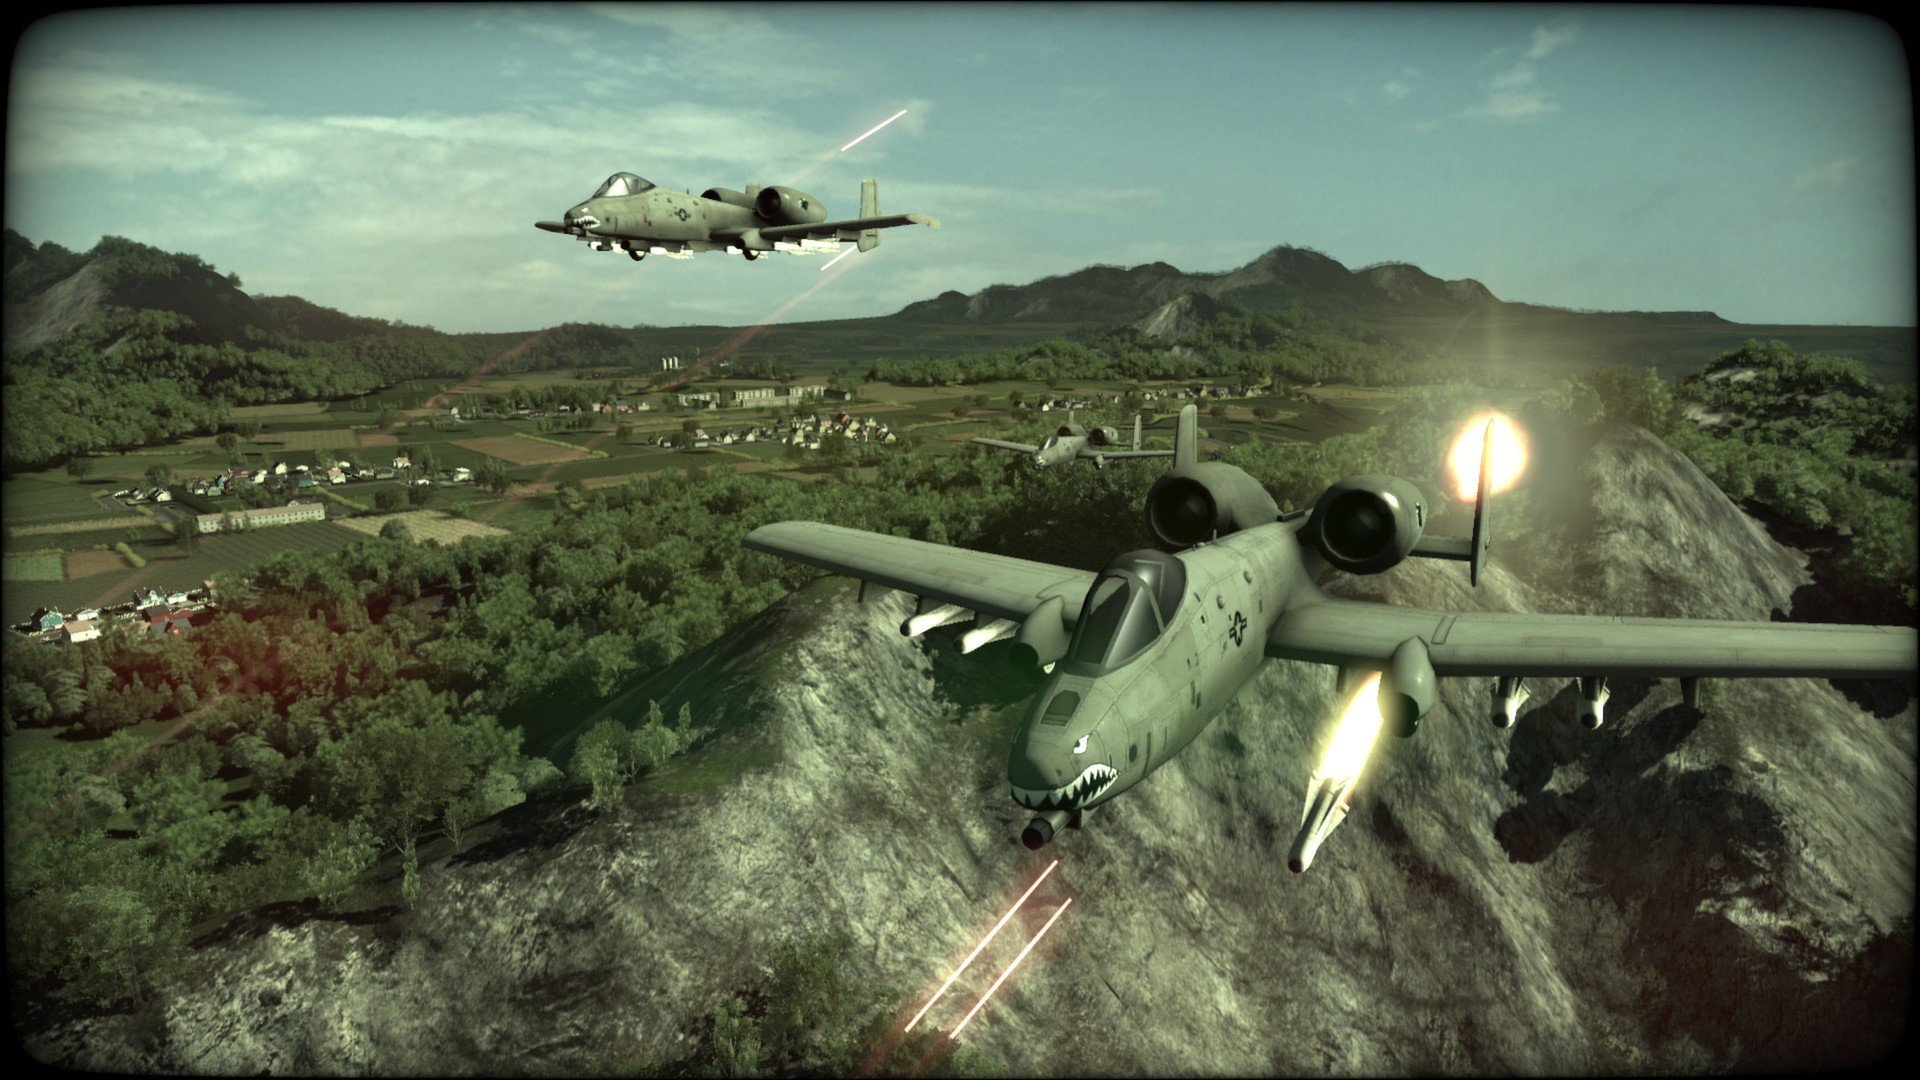 wargame, Game, Video, Military, War, Battle, Wwll, Air, Force, Fighter